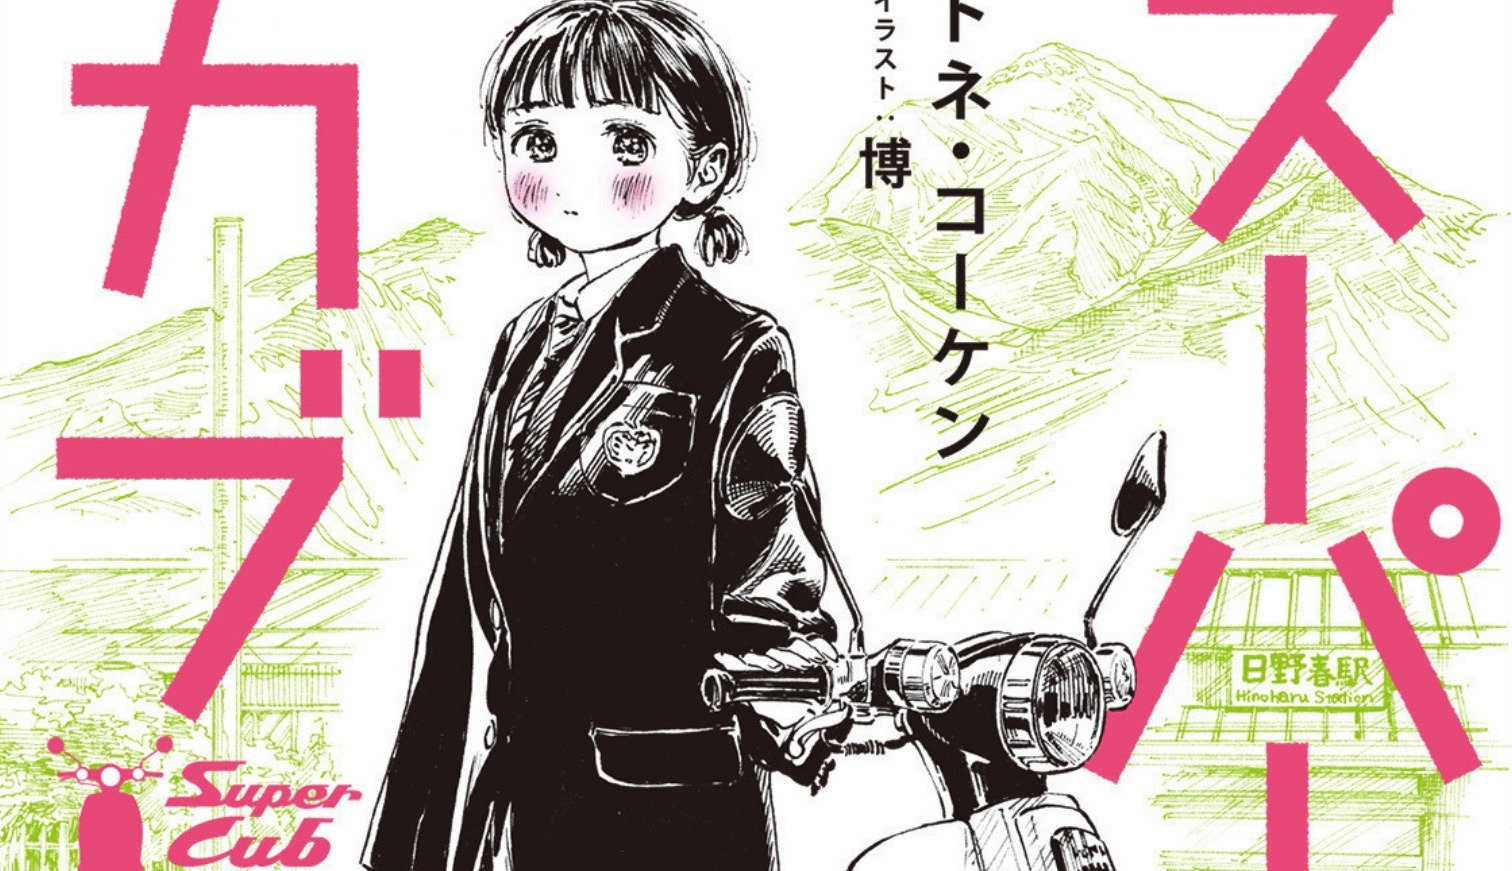 Super Cub Novel Series to End with Volume 8 thumbnail